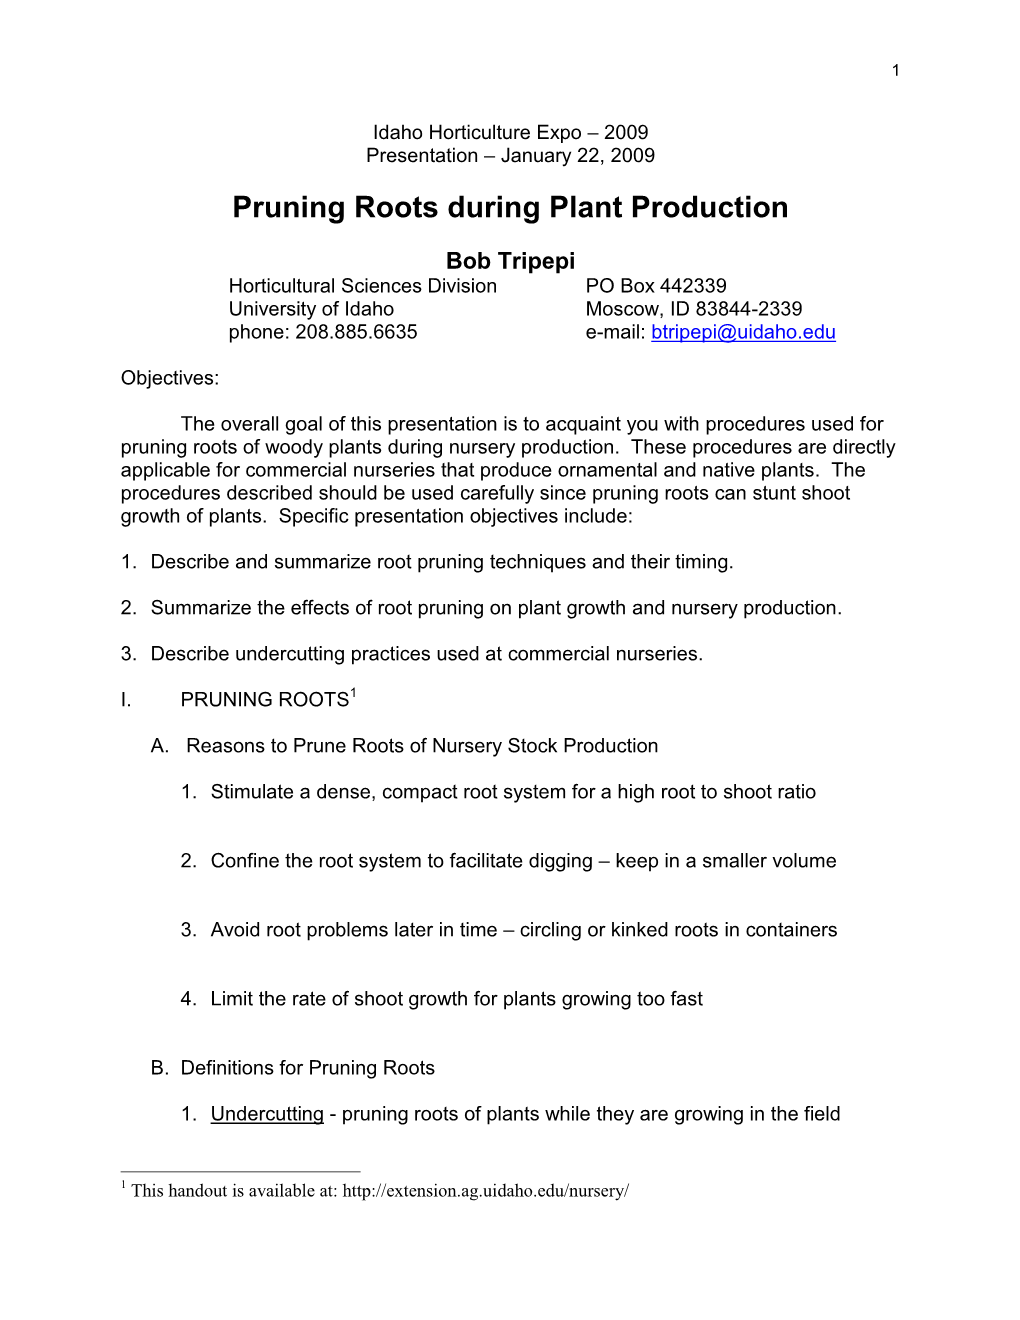 Pruning Roots During Plant Production